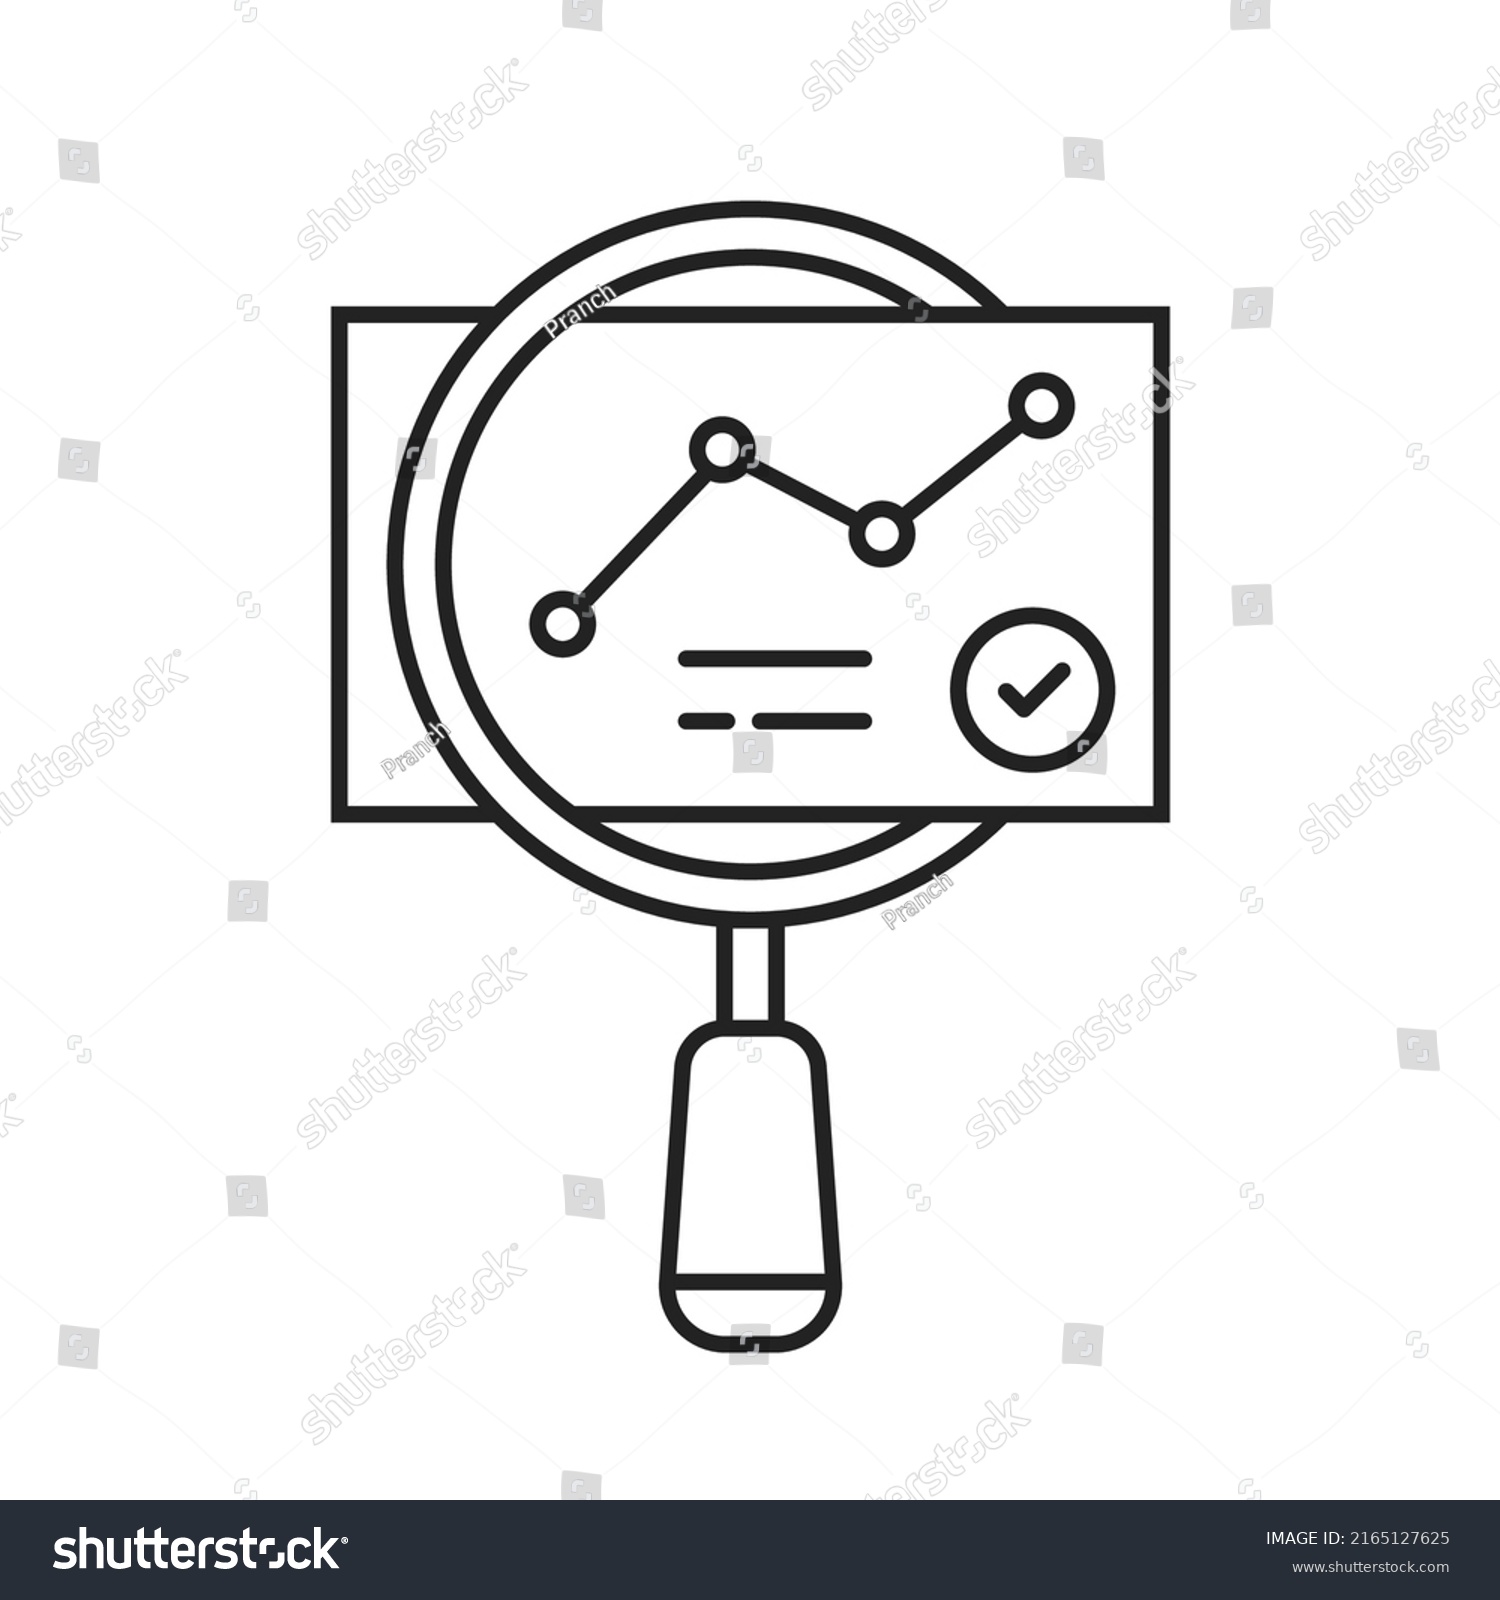 SVG of thin line quality control icon like audit validity. concept of key performance indicator or business visualisation. linear trend graphic stroke design lineart logotype web element isolated on white svg